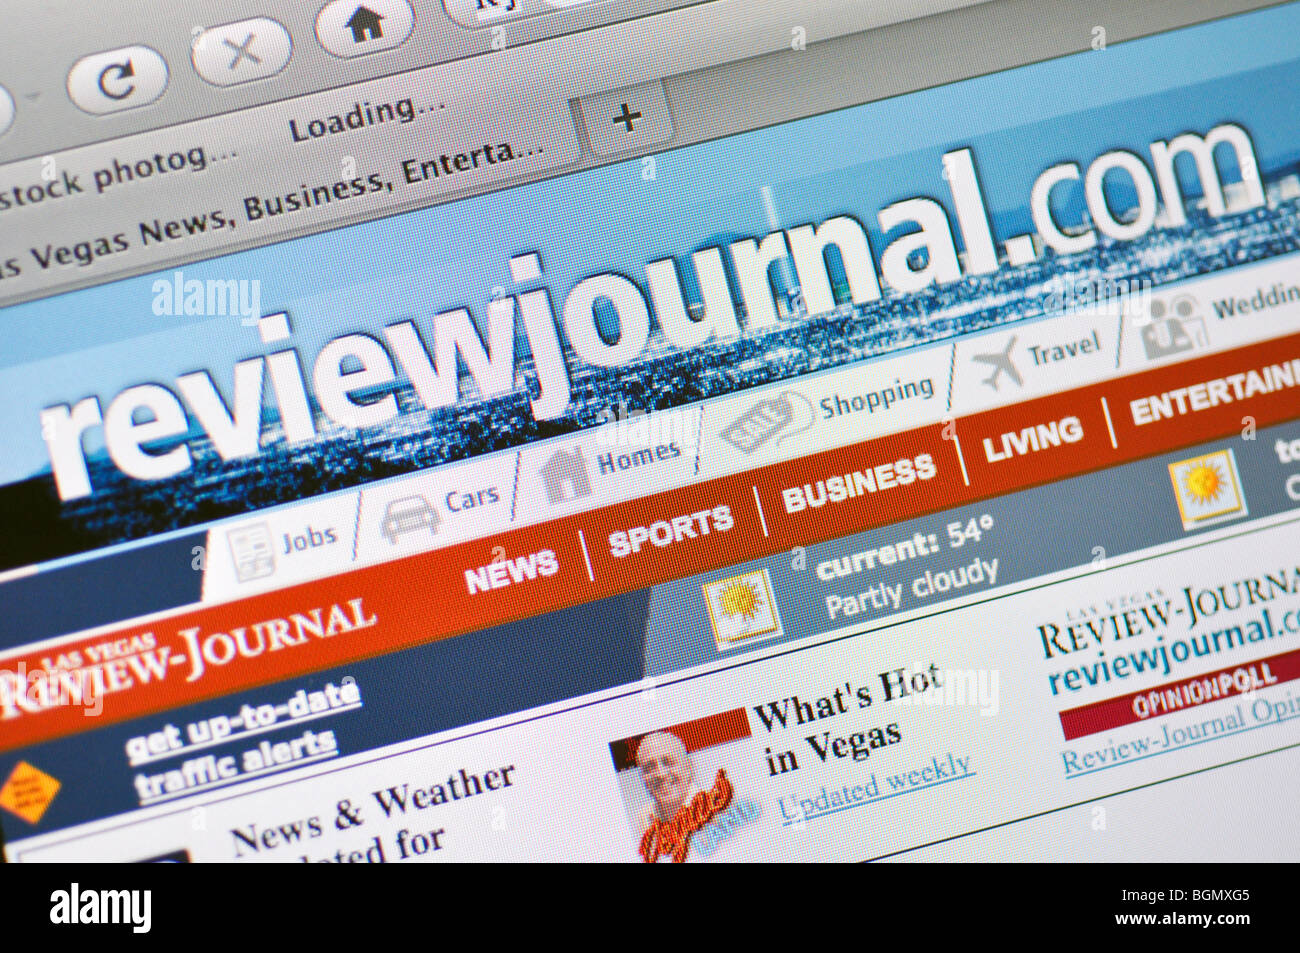 Review Journal website Stock Photo